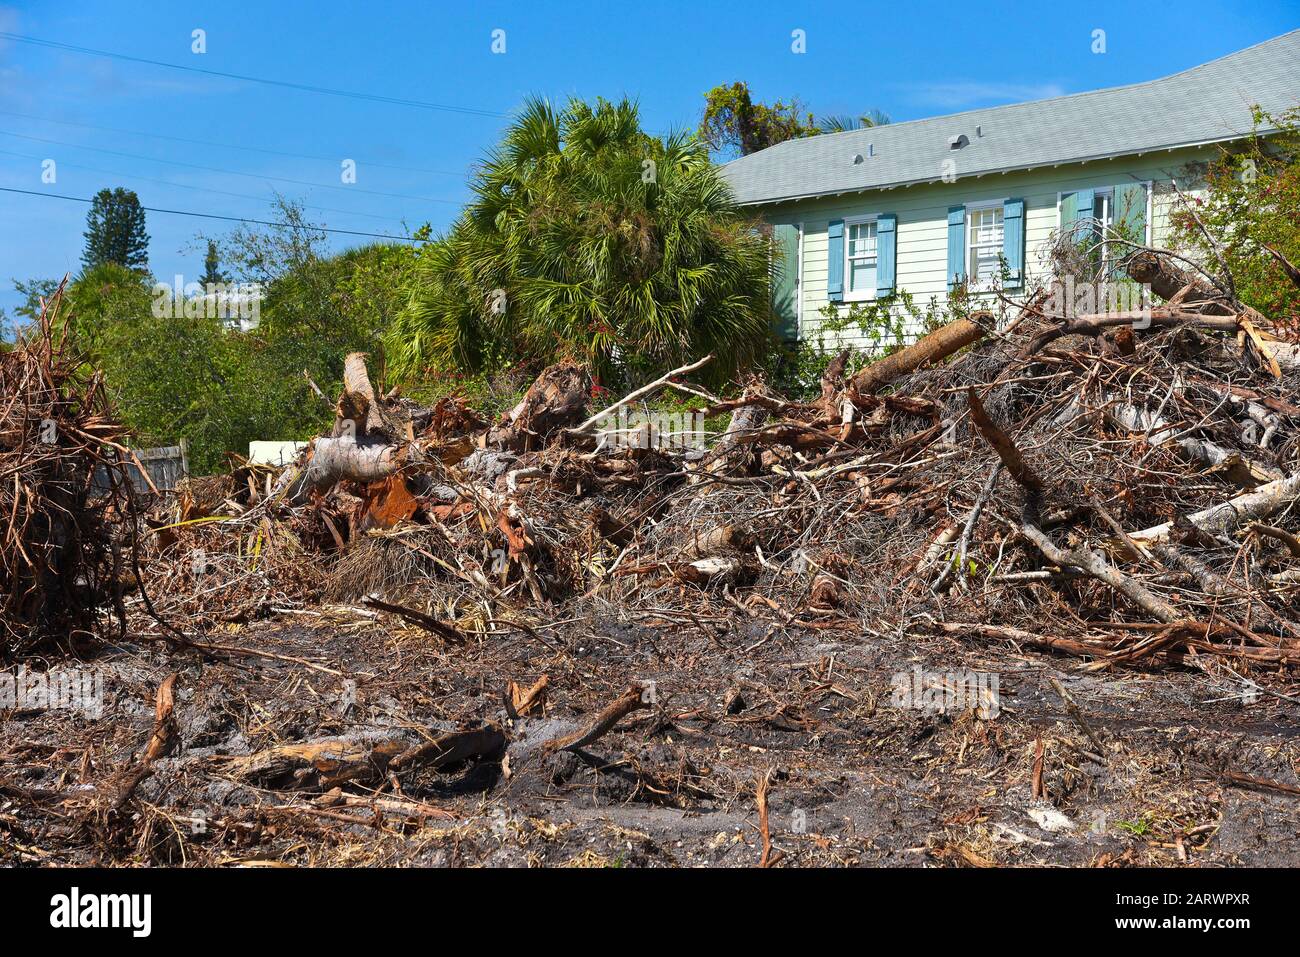 ANNA MARIA ISLAND, FL - October 2, 2017:Aftermath of Hurricane Irma on Anna Maria Island, Florida. Piles of Trees, Branches and debris remain to be cl Stock Photo